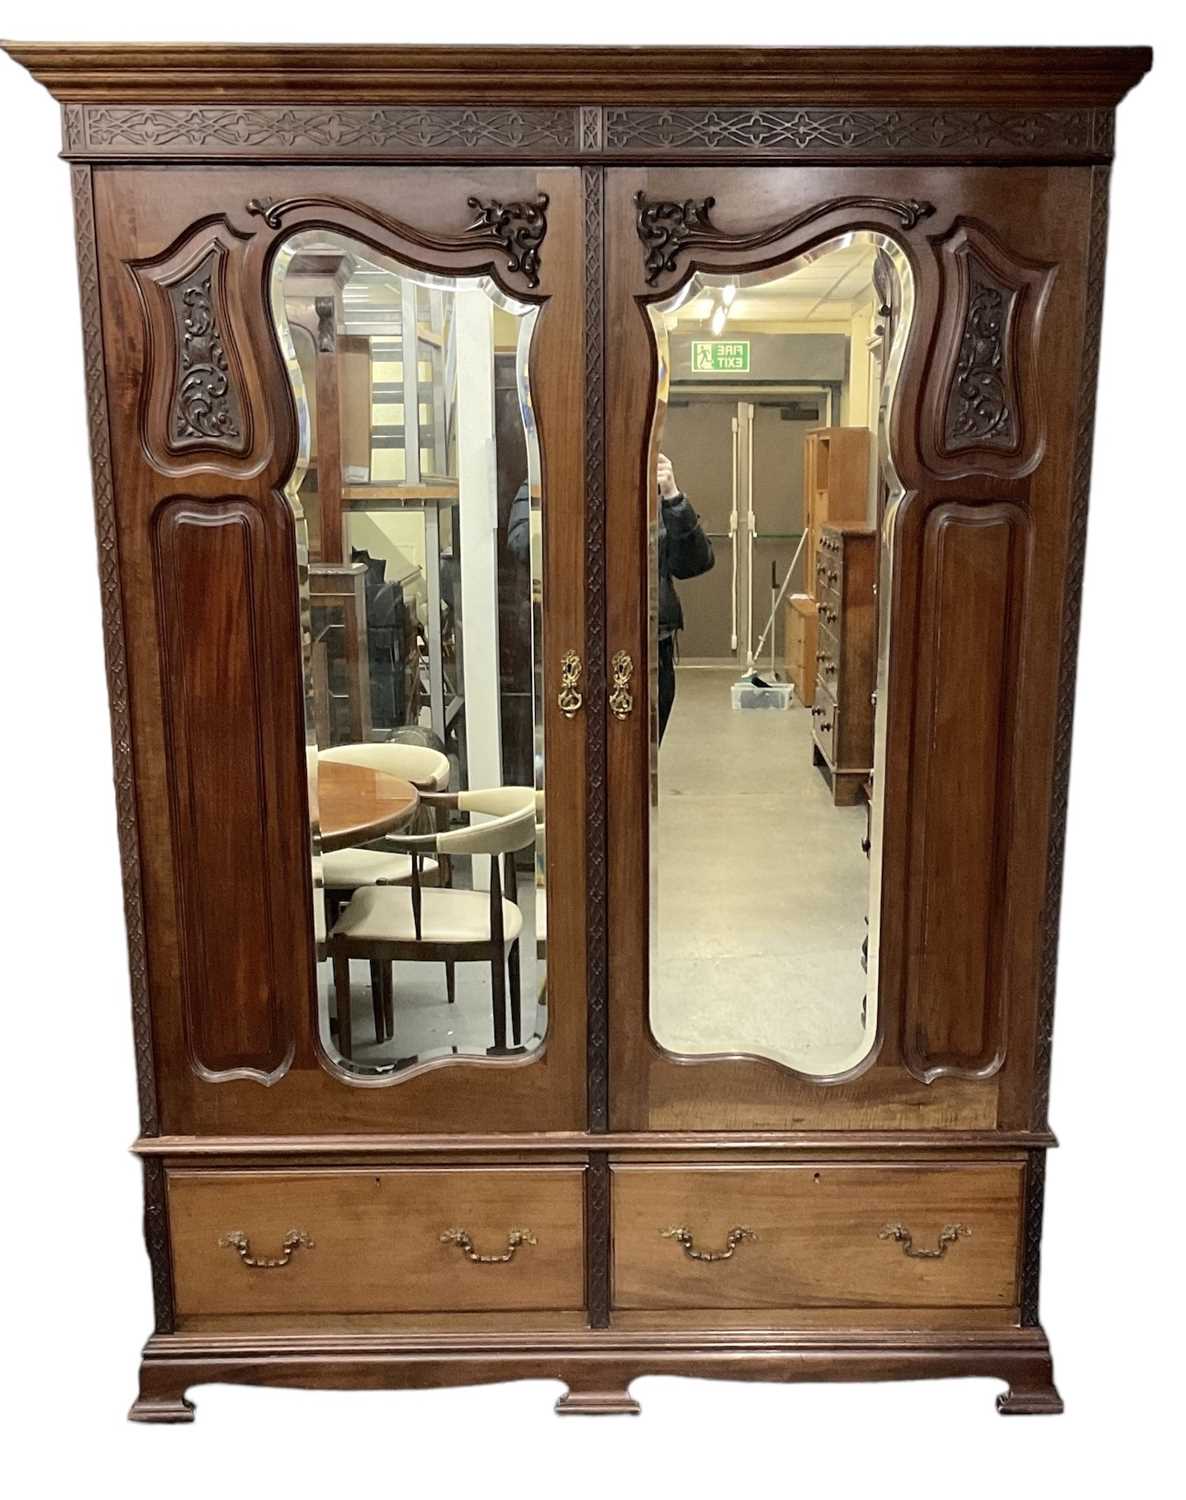 An early 20th century mahogany wardrobe, with pair of mirrored doors above pair of drawers, height